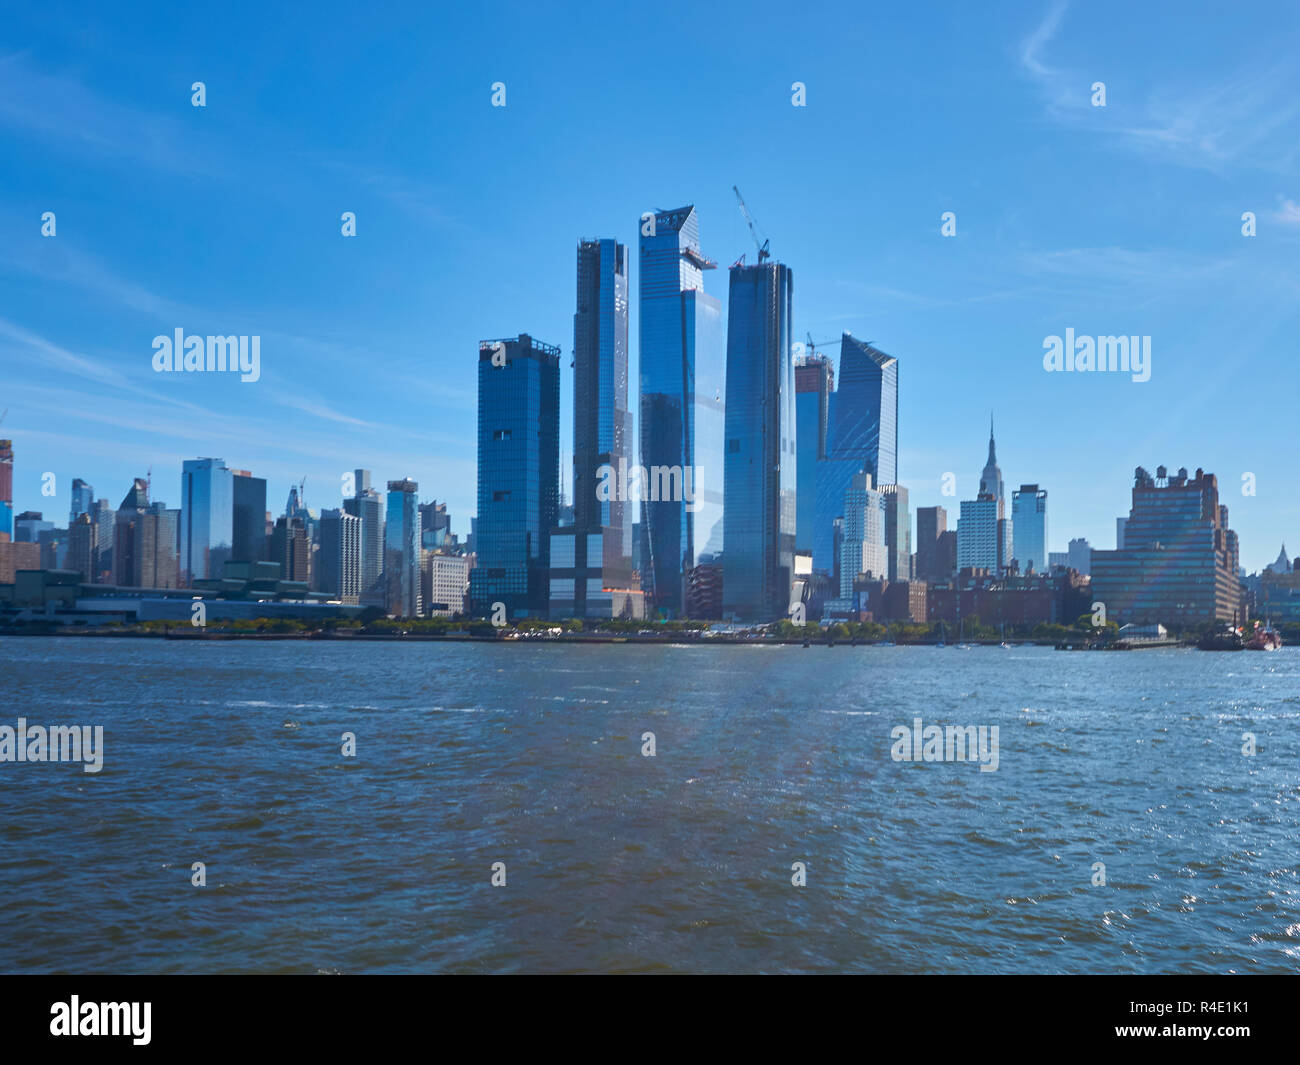 New York City skyline, a blue sky and water Stock Photo